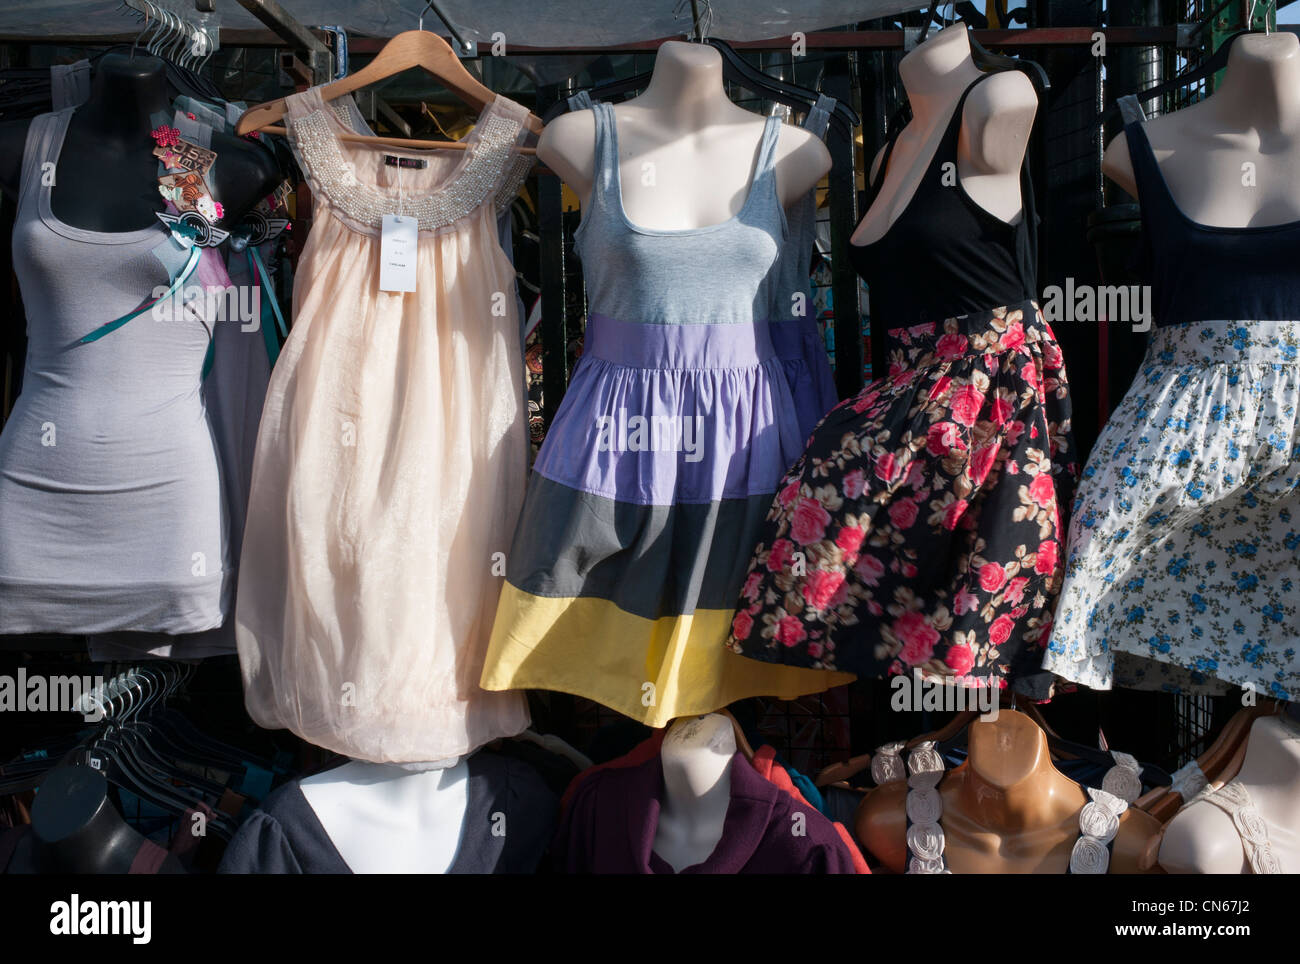 Mannequins wearing dresses outside shop in Camden Market, Camden Town, London England Stock Photo